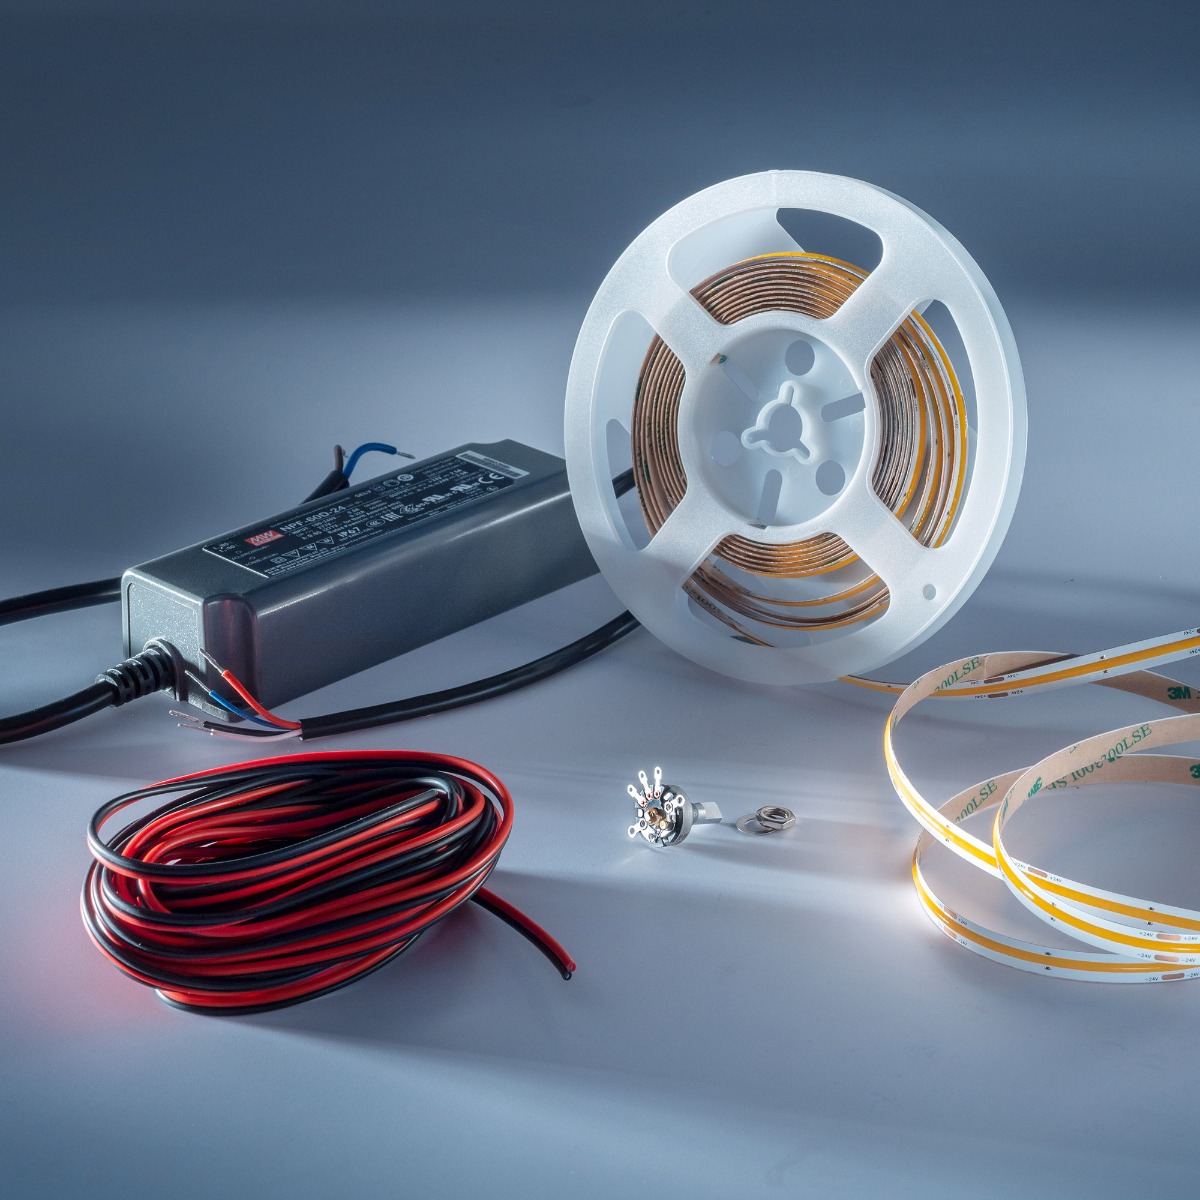 Starter-Kit LumiFlex COB LED Strip with continuous light warm white CRI90 2700K 5690lm 24V 5m reel with driver and dimmer